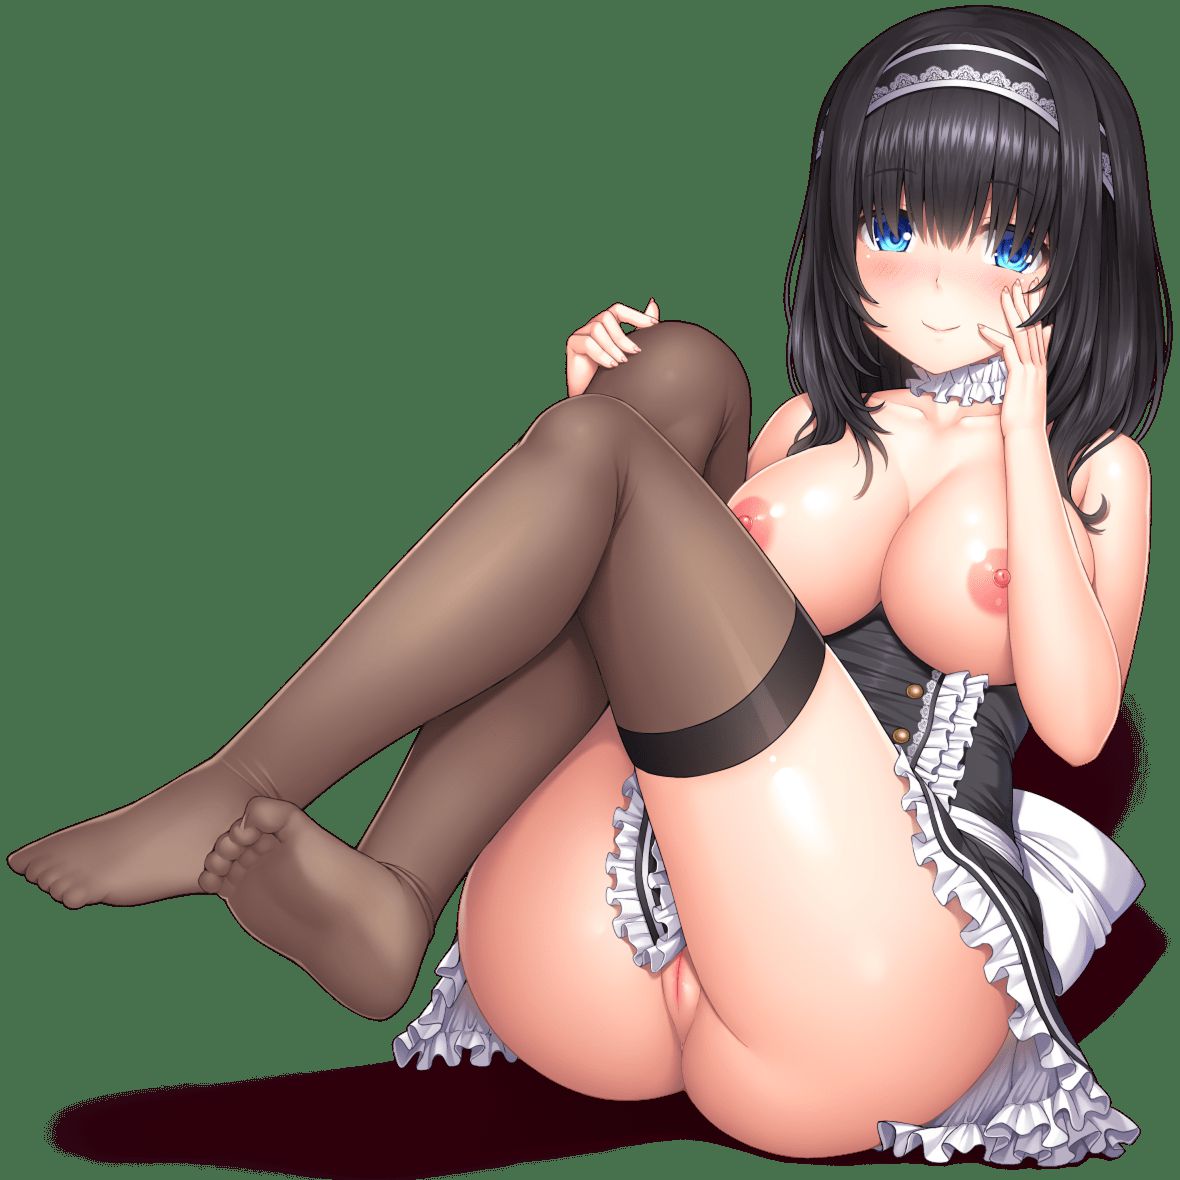 [Anime character material] png background, such as anime characters erotic image material 205 57